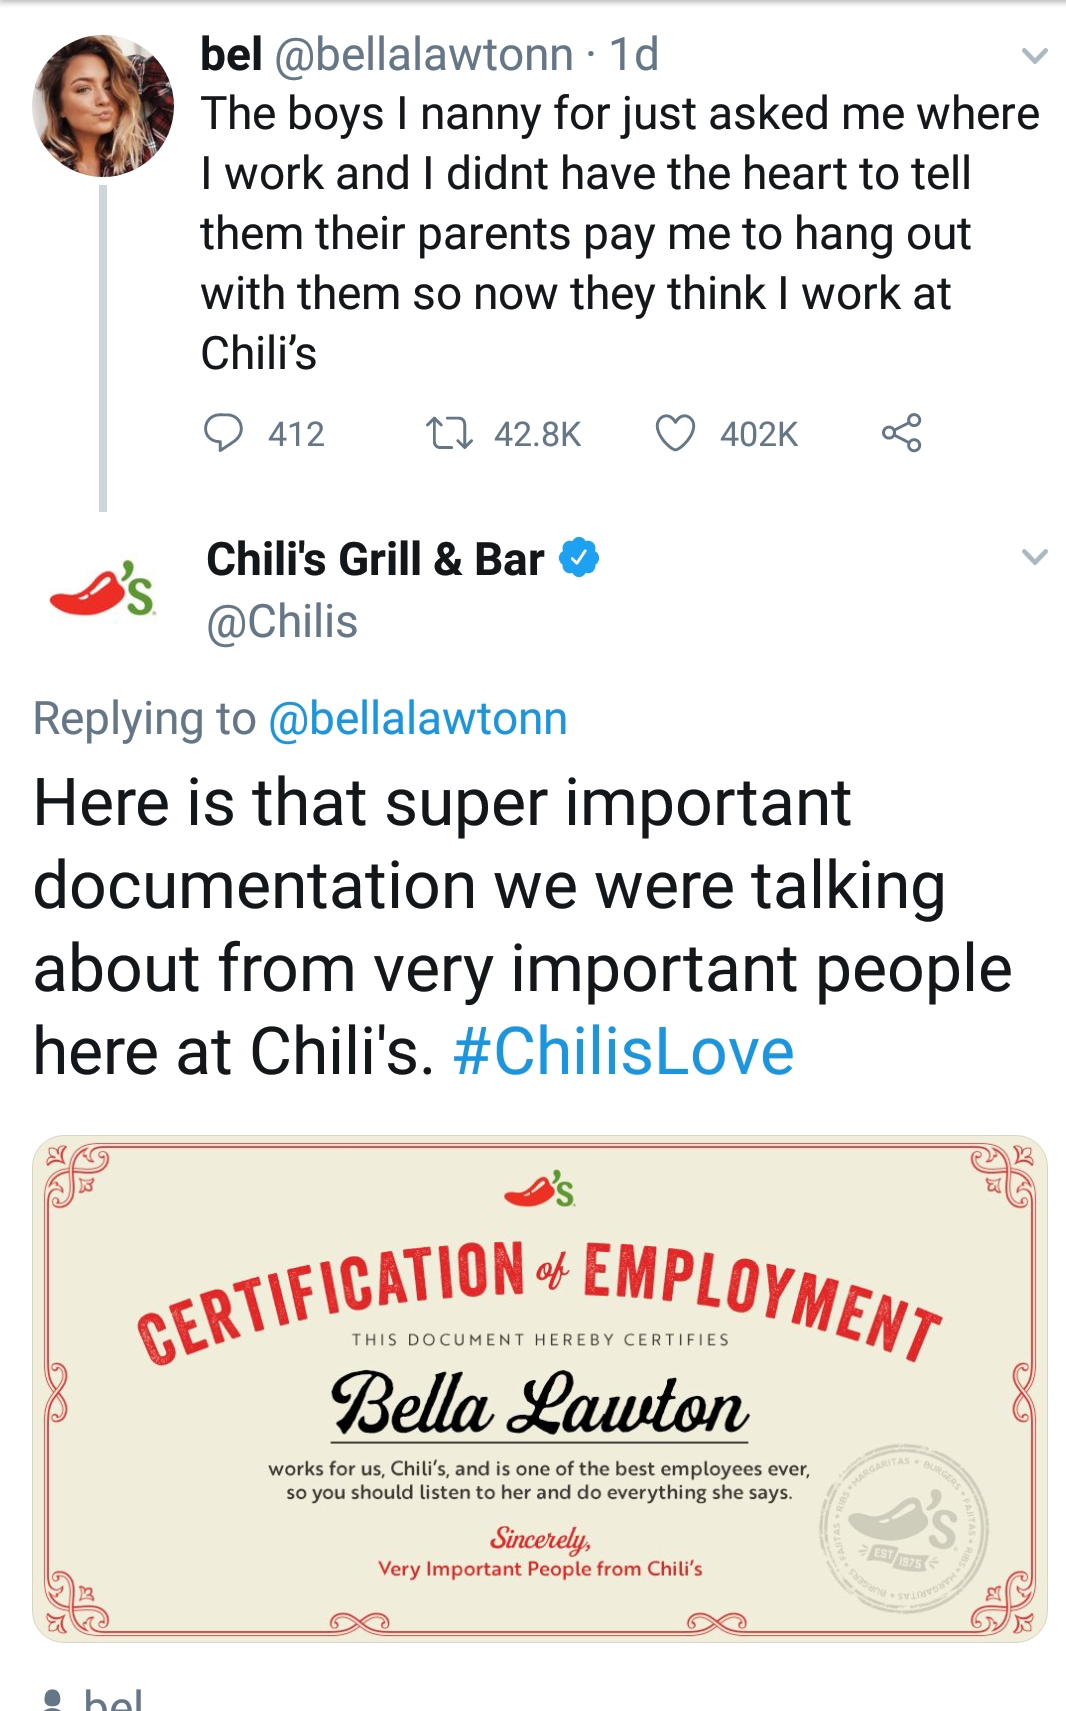 paper - bel . 1d The boys I nanny for just asked me where I work and I didnt have the heart to tell them their parents pay me to hang out with them so now they think I work at Chili's 412 Chili's Grill & Bar Here is that super important documentation we w